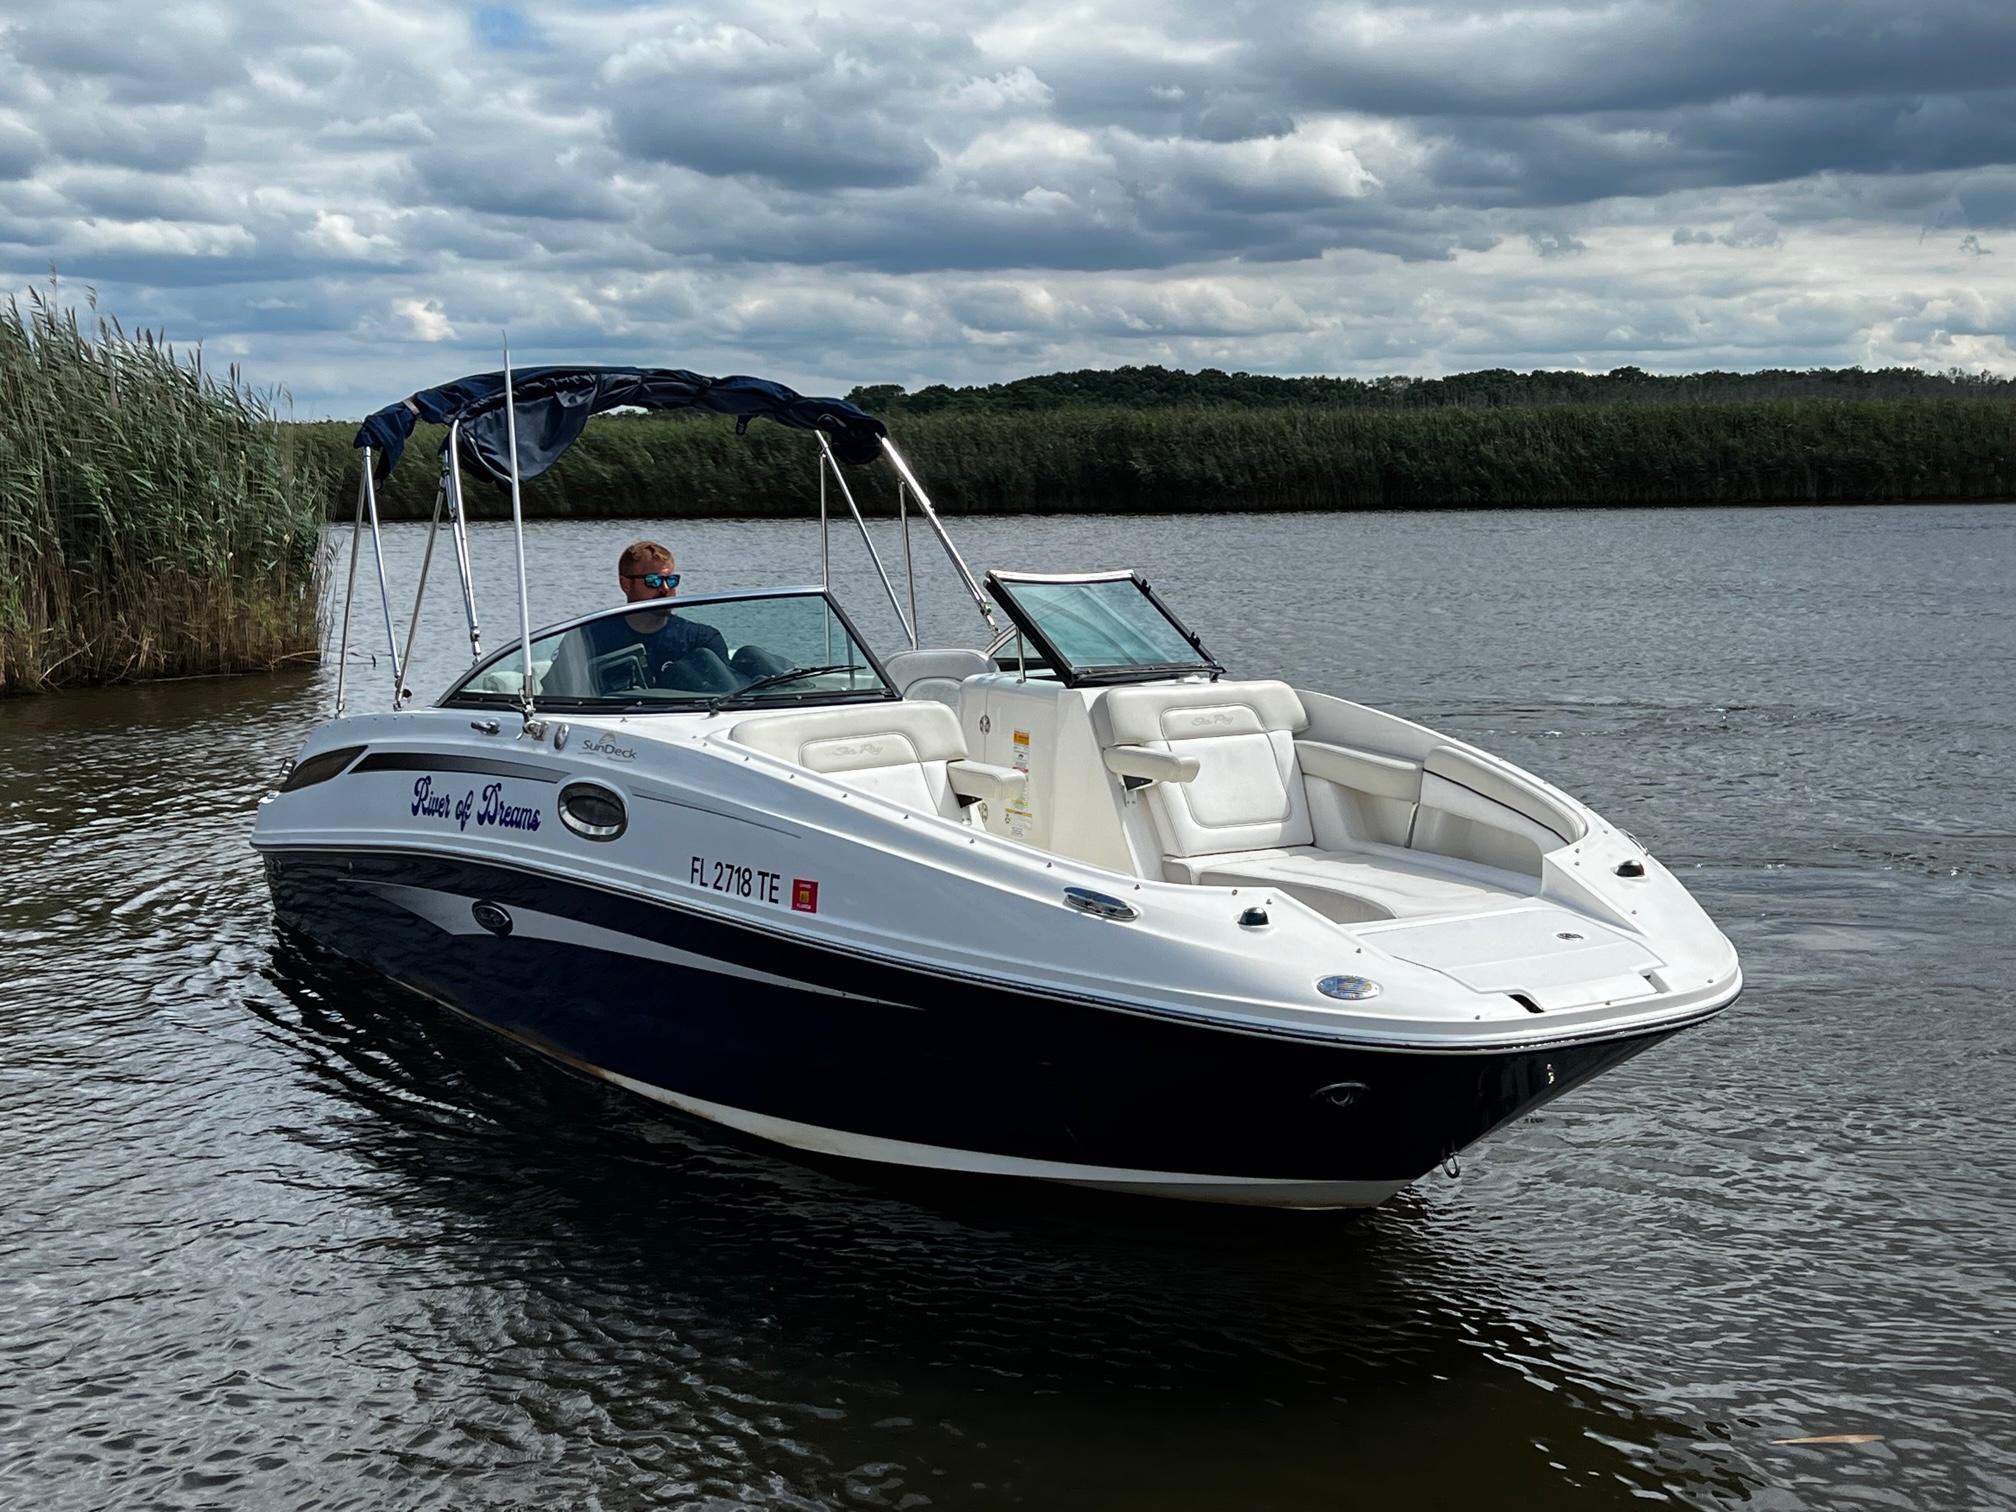 2012 Sea Ray 260 Sundeck Deck for sale - YachtWorld